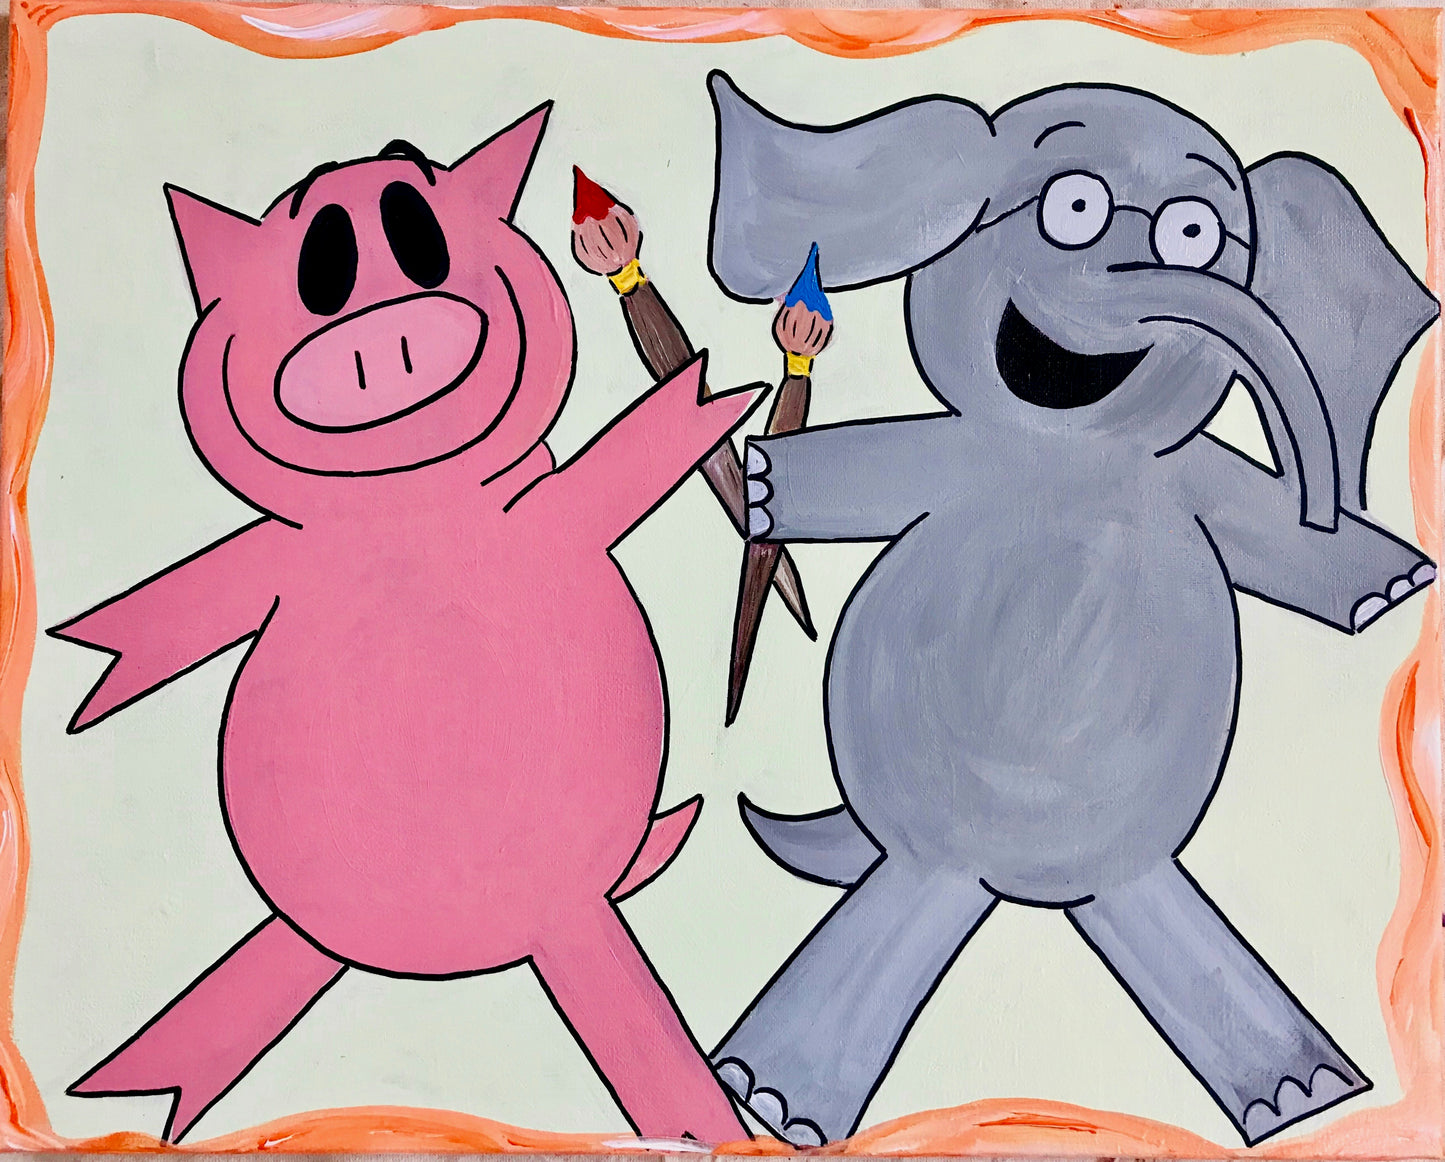 Elephant & Piggie's "We Are in a Painting!"